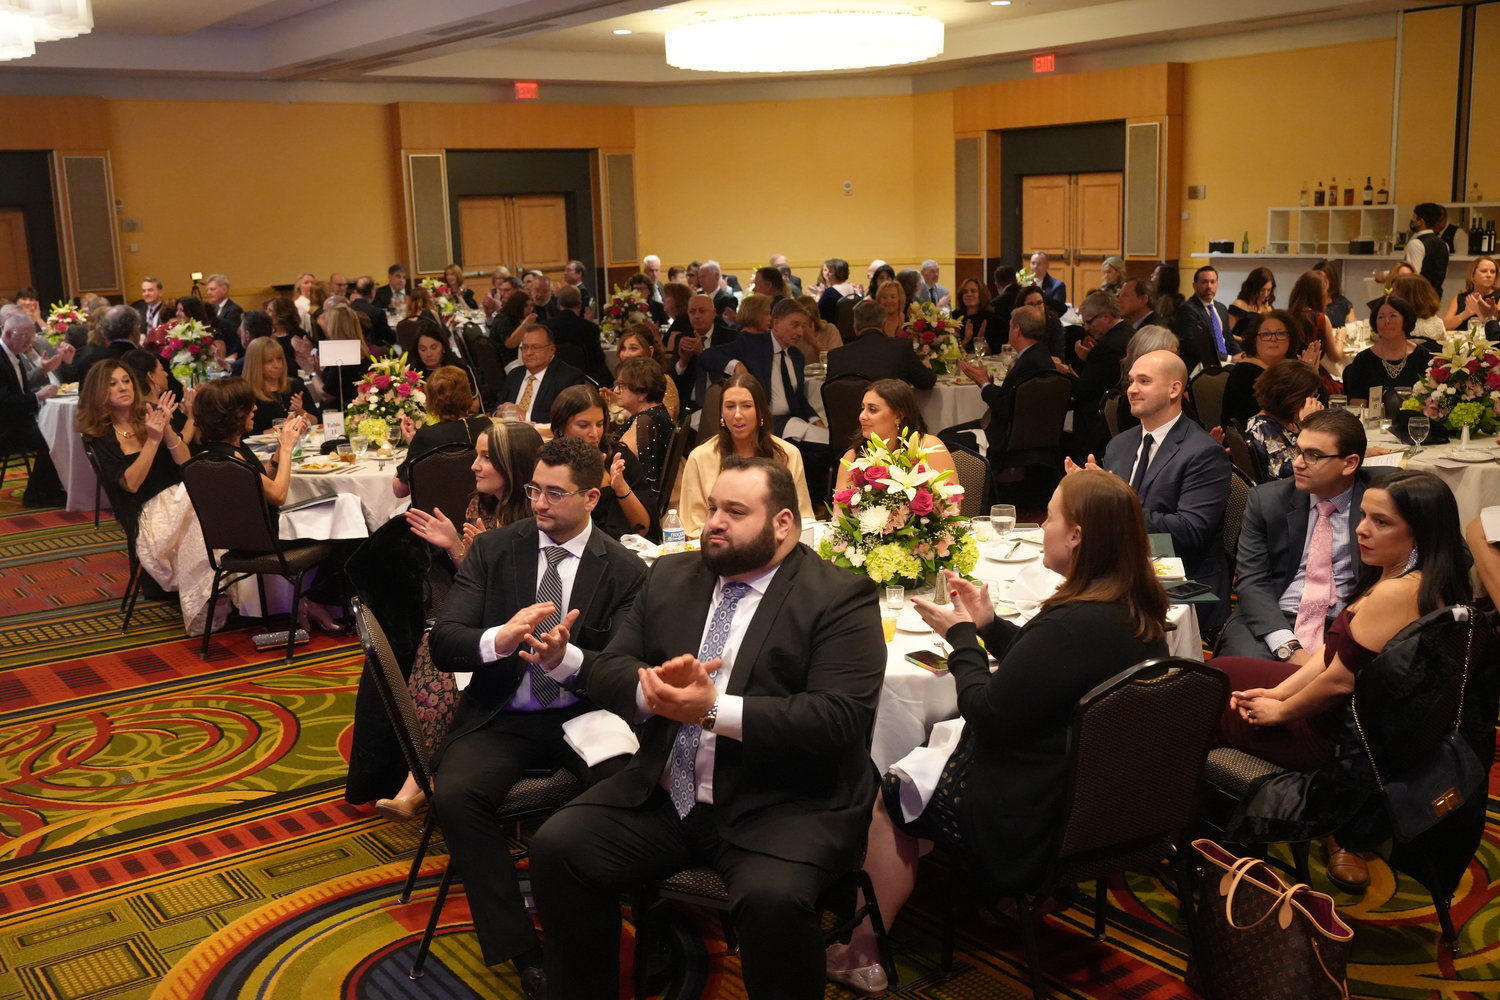 Hundreds filled the ballroom at the Long Island Marriott in Uniondale for the annual St. Agnes Cathedral School Dinner Dance on Feb. 4.